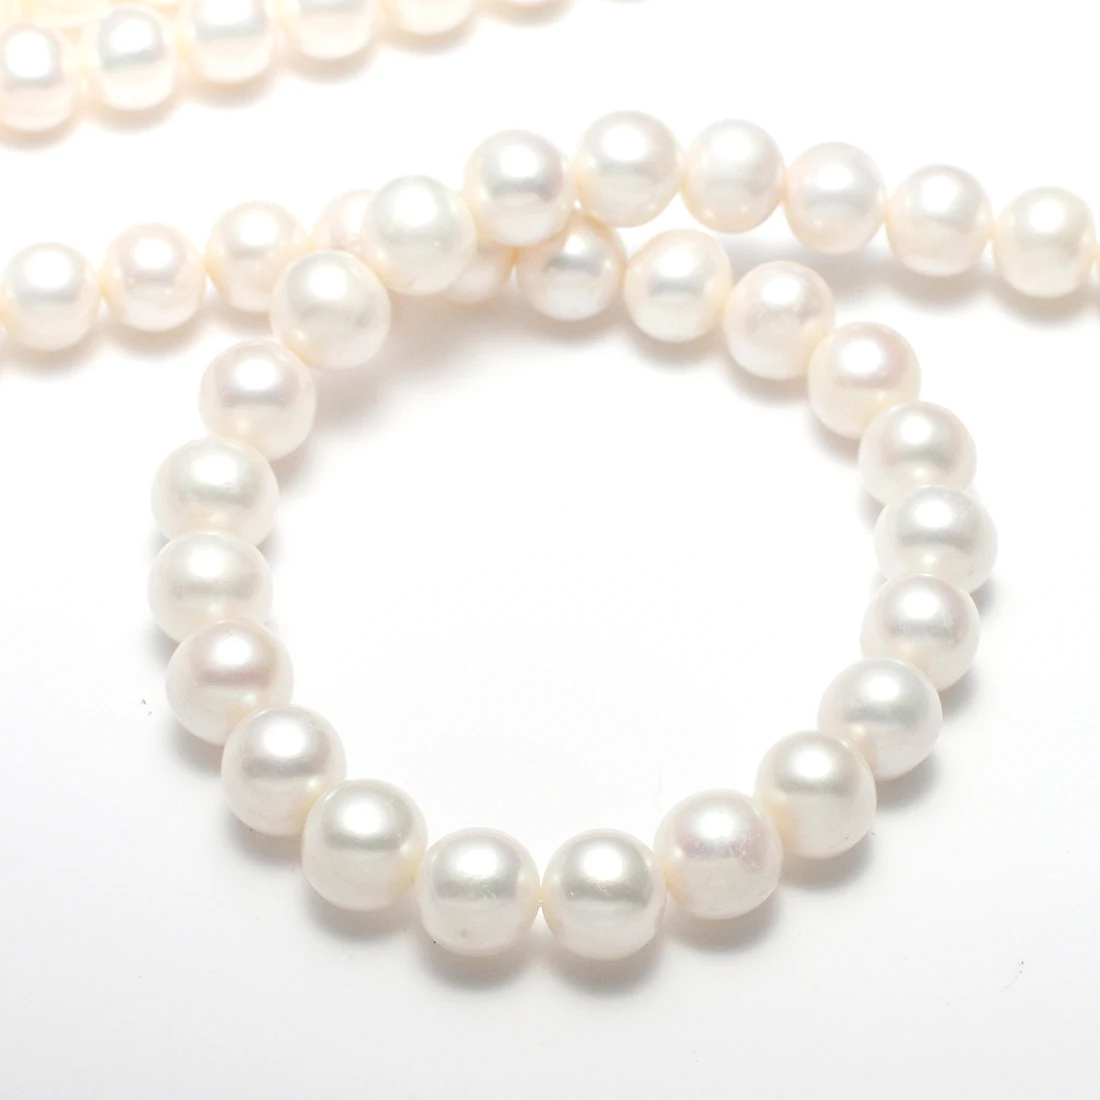 

Natural White 10-11mm Cultured Potato Freshwater Pearl Beads 0.8mm Hole 15.7inch/Strand for DIY Bracelet Necklace Jewelry Making